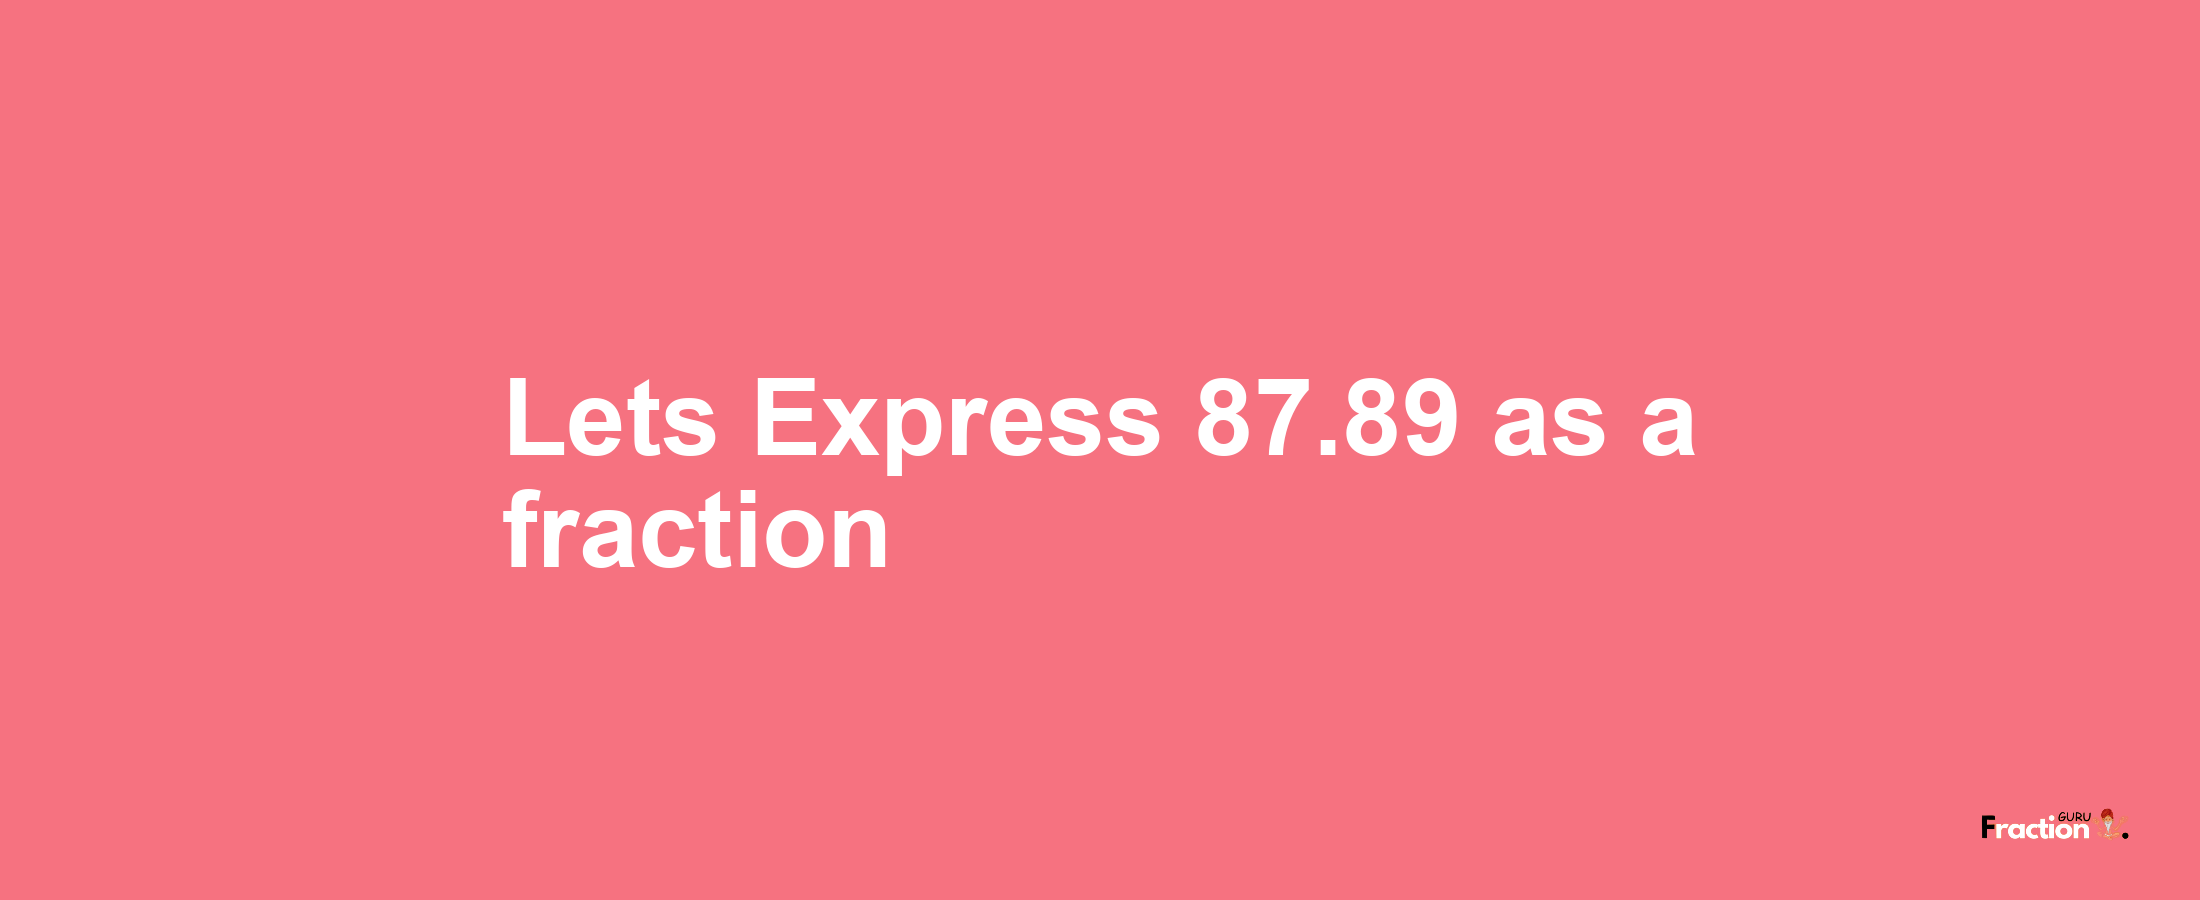 Lets Express 87.89 as afraction